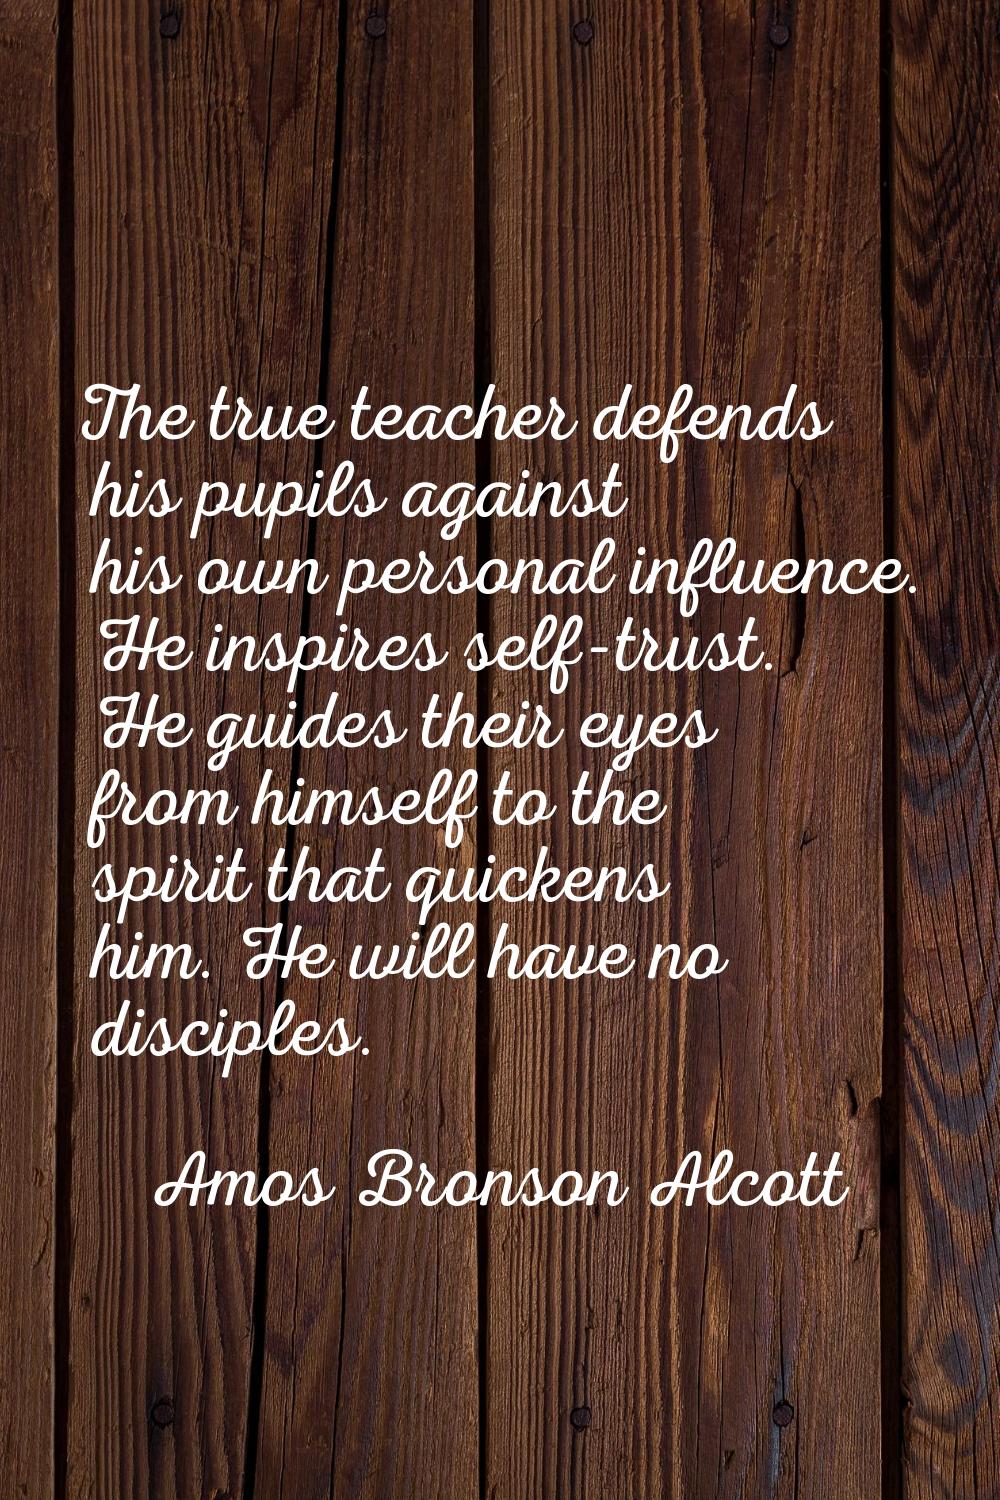 The true teacher defends his pupils against his own personal influence. He inspires self-trust. He 